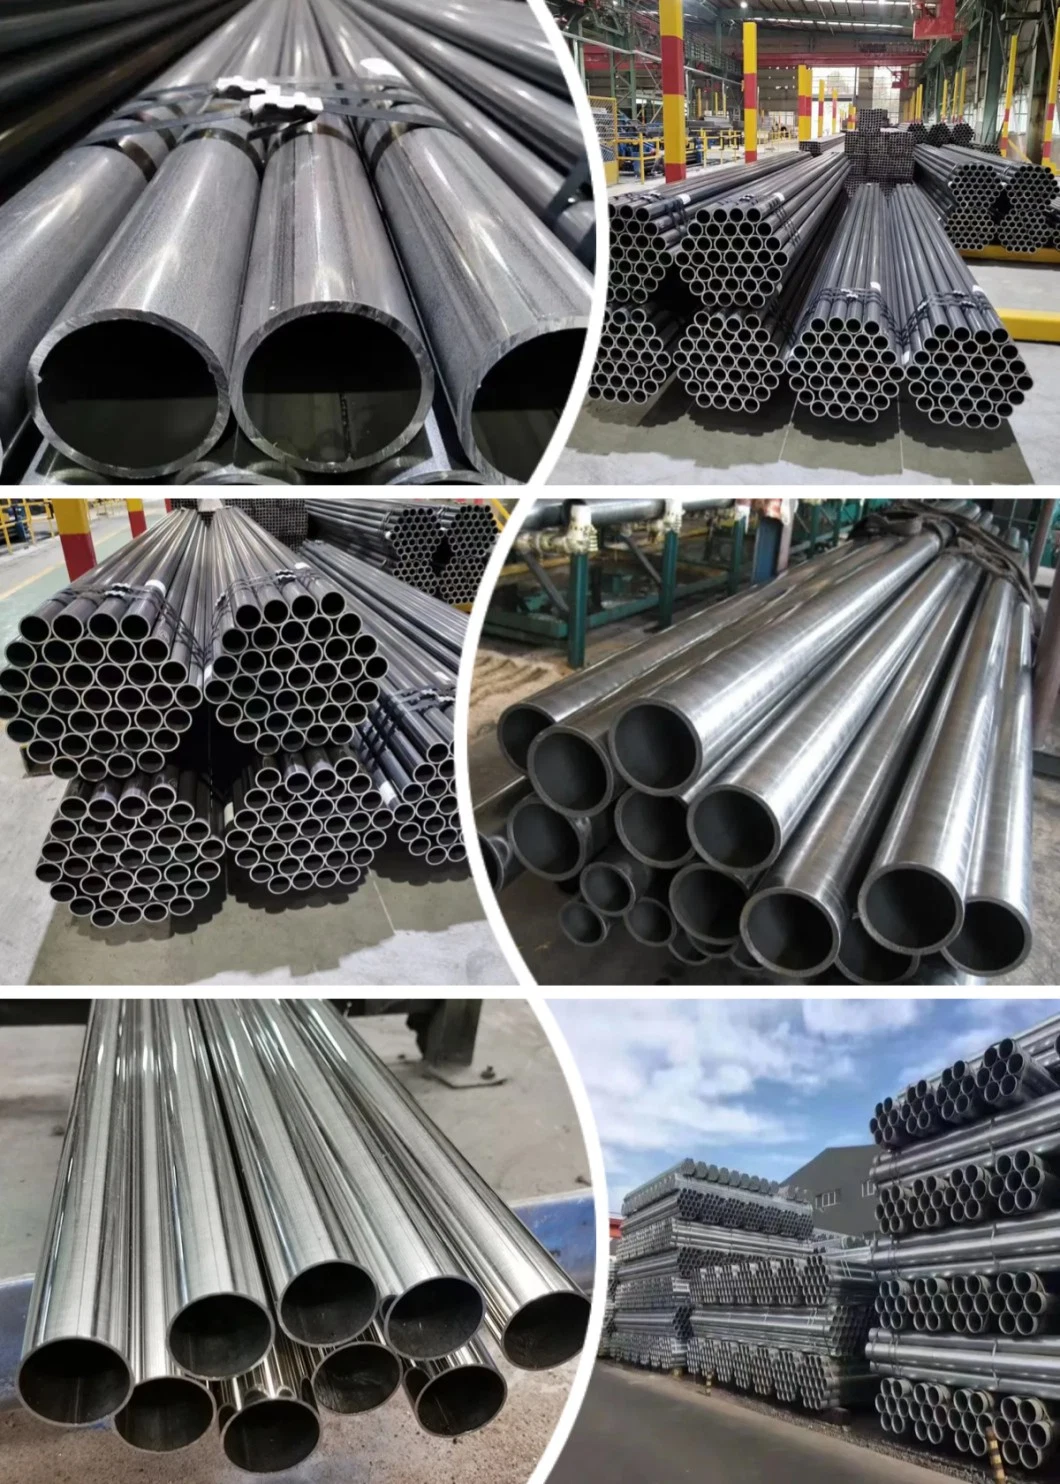 ASTM A519 DIN 2391 Cold Rolled Seamless Pipe Cold Rolled Seamless Pipe Cold Finished Steel Pipe Cold Rolled Steel Pipe